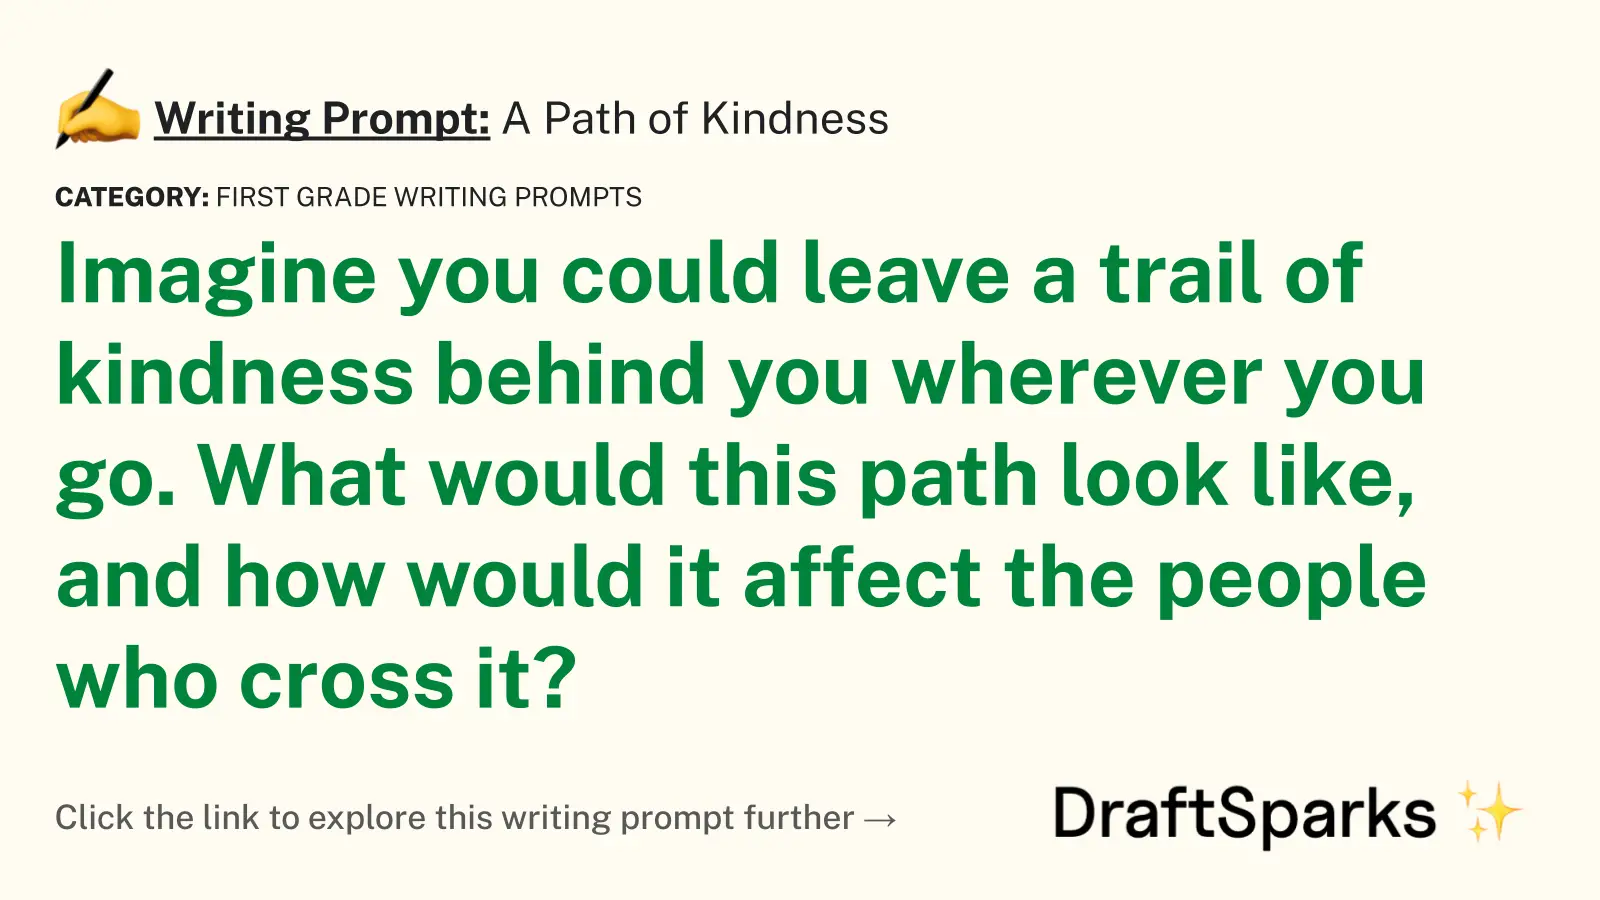 A Path of Kindness